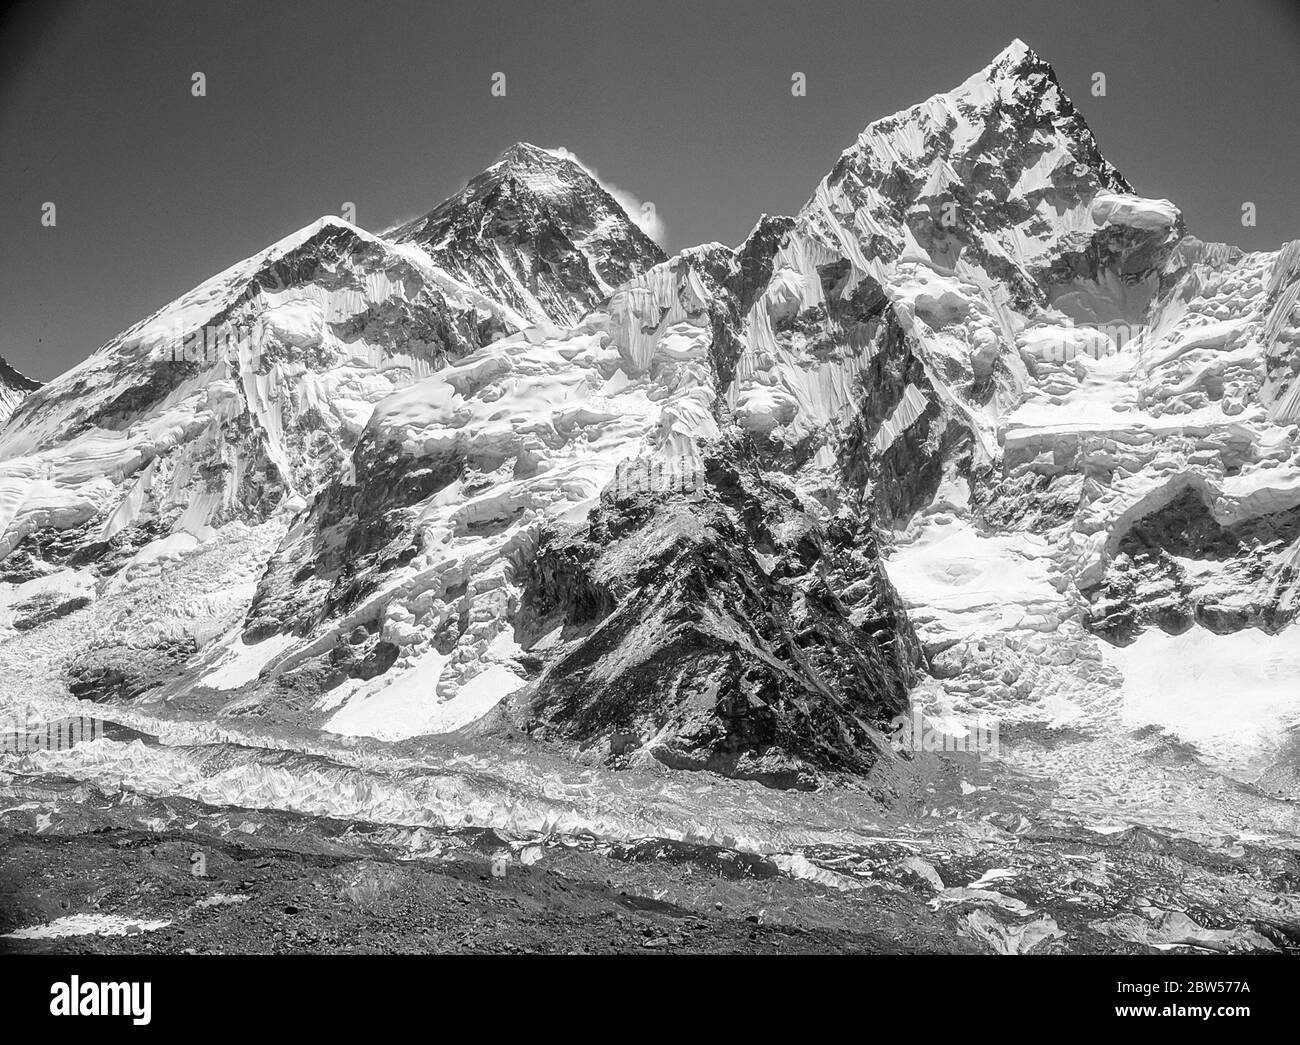 Nepal. Mount Everest [Chomolongma] 8848m the highest mountain in the world, with near neighbour Nuptse7906m in monochrome, as seen from Kalar Patar above Gorak Shep pasture Stock Photo